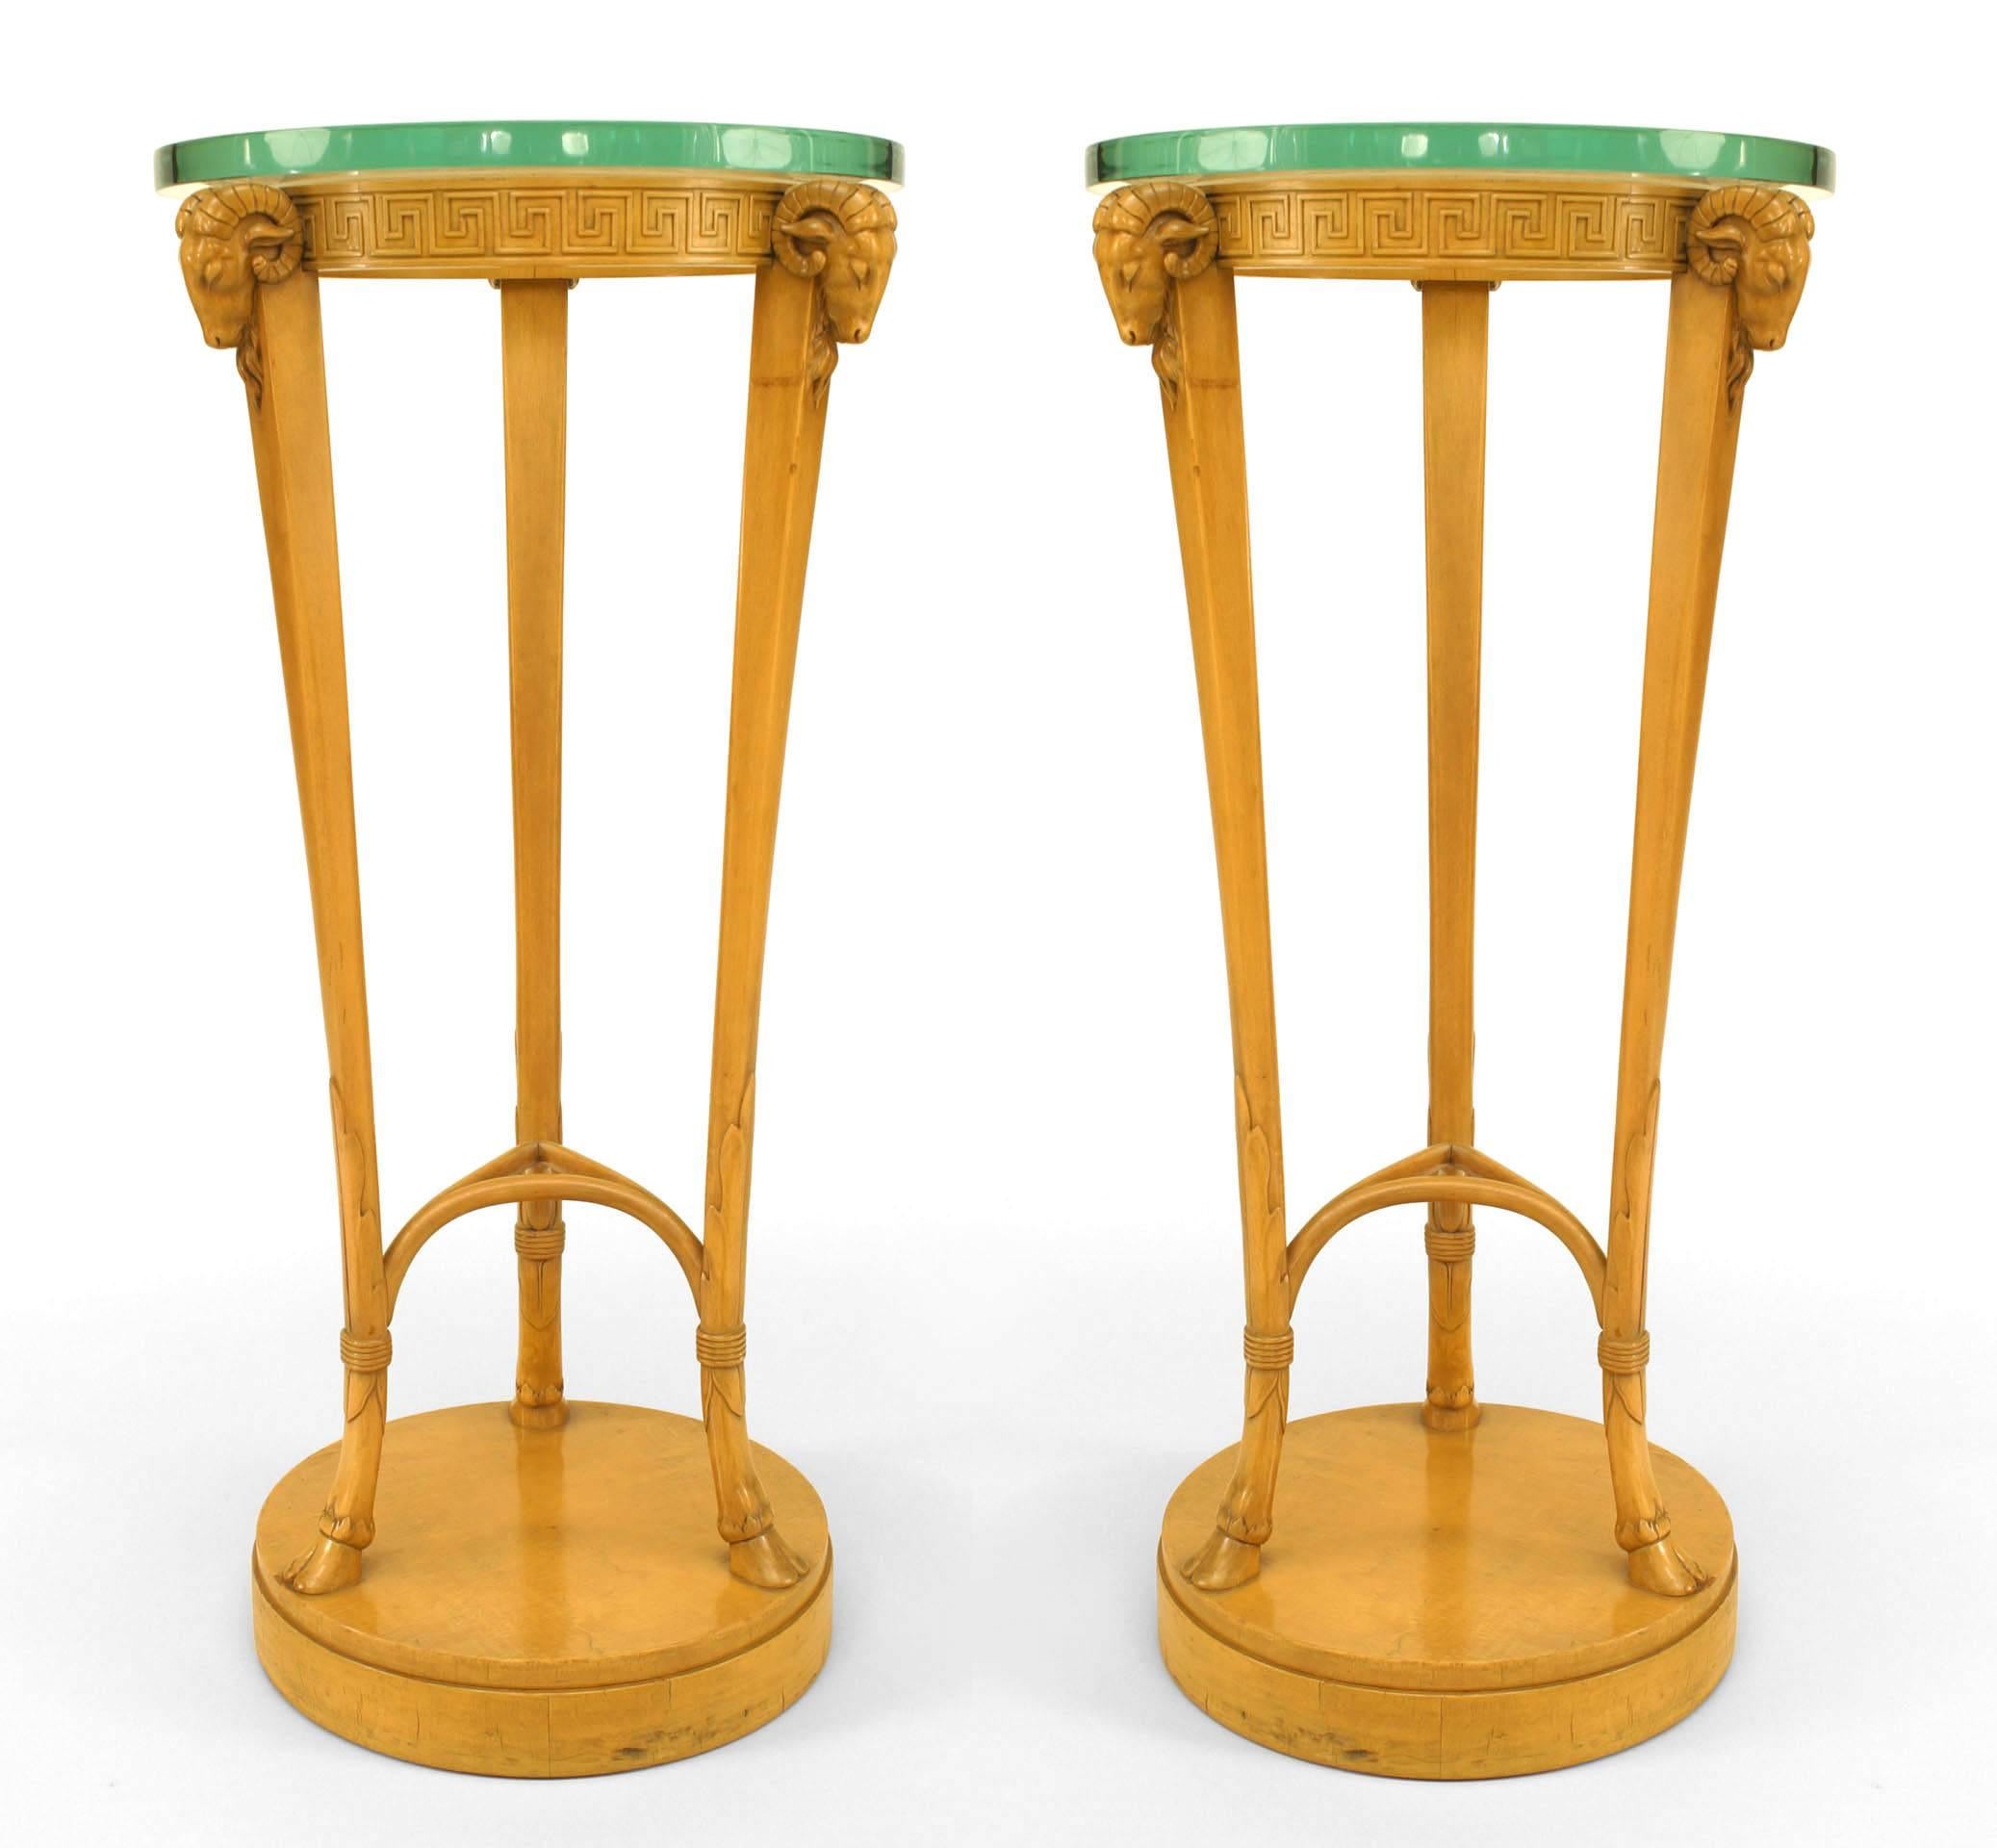 Pair of American Art Moderne sycamore pedestals with 3 ram heads and round glass tops above a Greek key apron with a stretcher and round base. (T. H. ROBSJOHN GIBBINGS)
